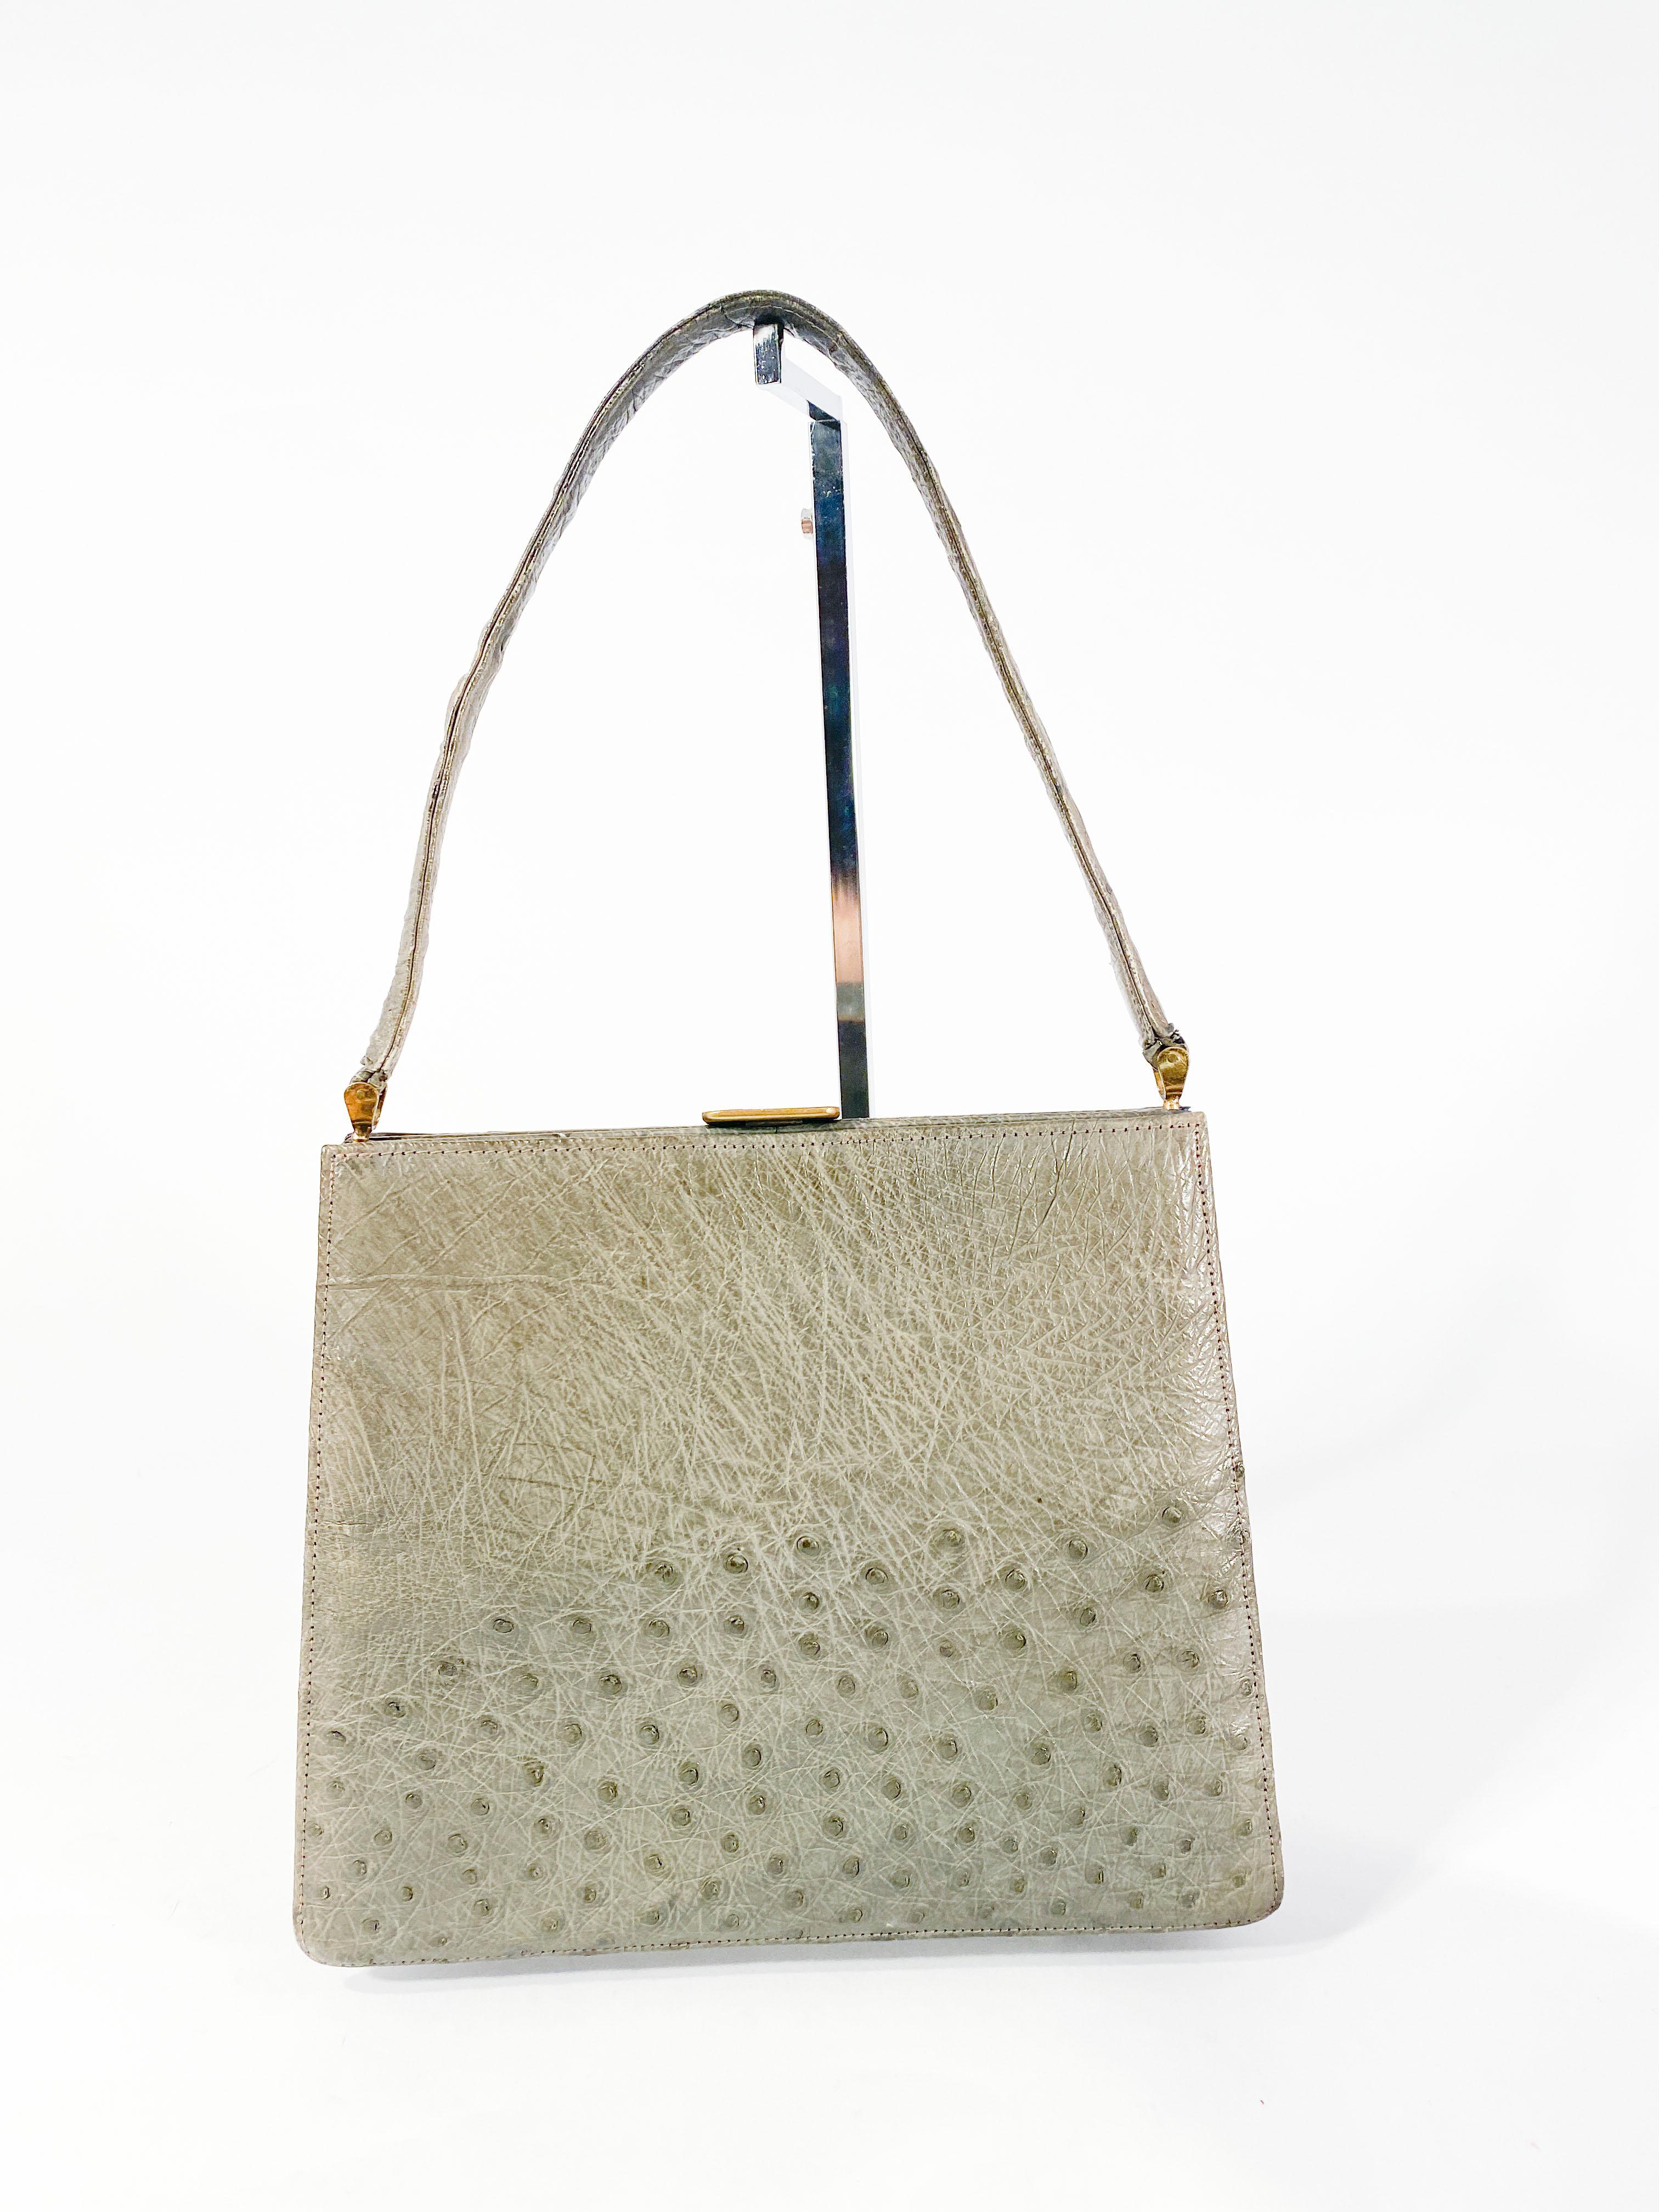 1950s Grey ostrich envelope handbag with matching top handle. The body of the bag is lined in suede with one large zip pocket and two open pockets for makeup and the included mirror. The clasp closure is made of brass finished with a small panel of